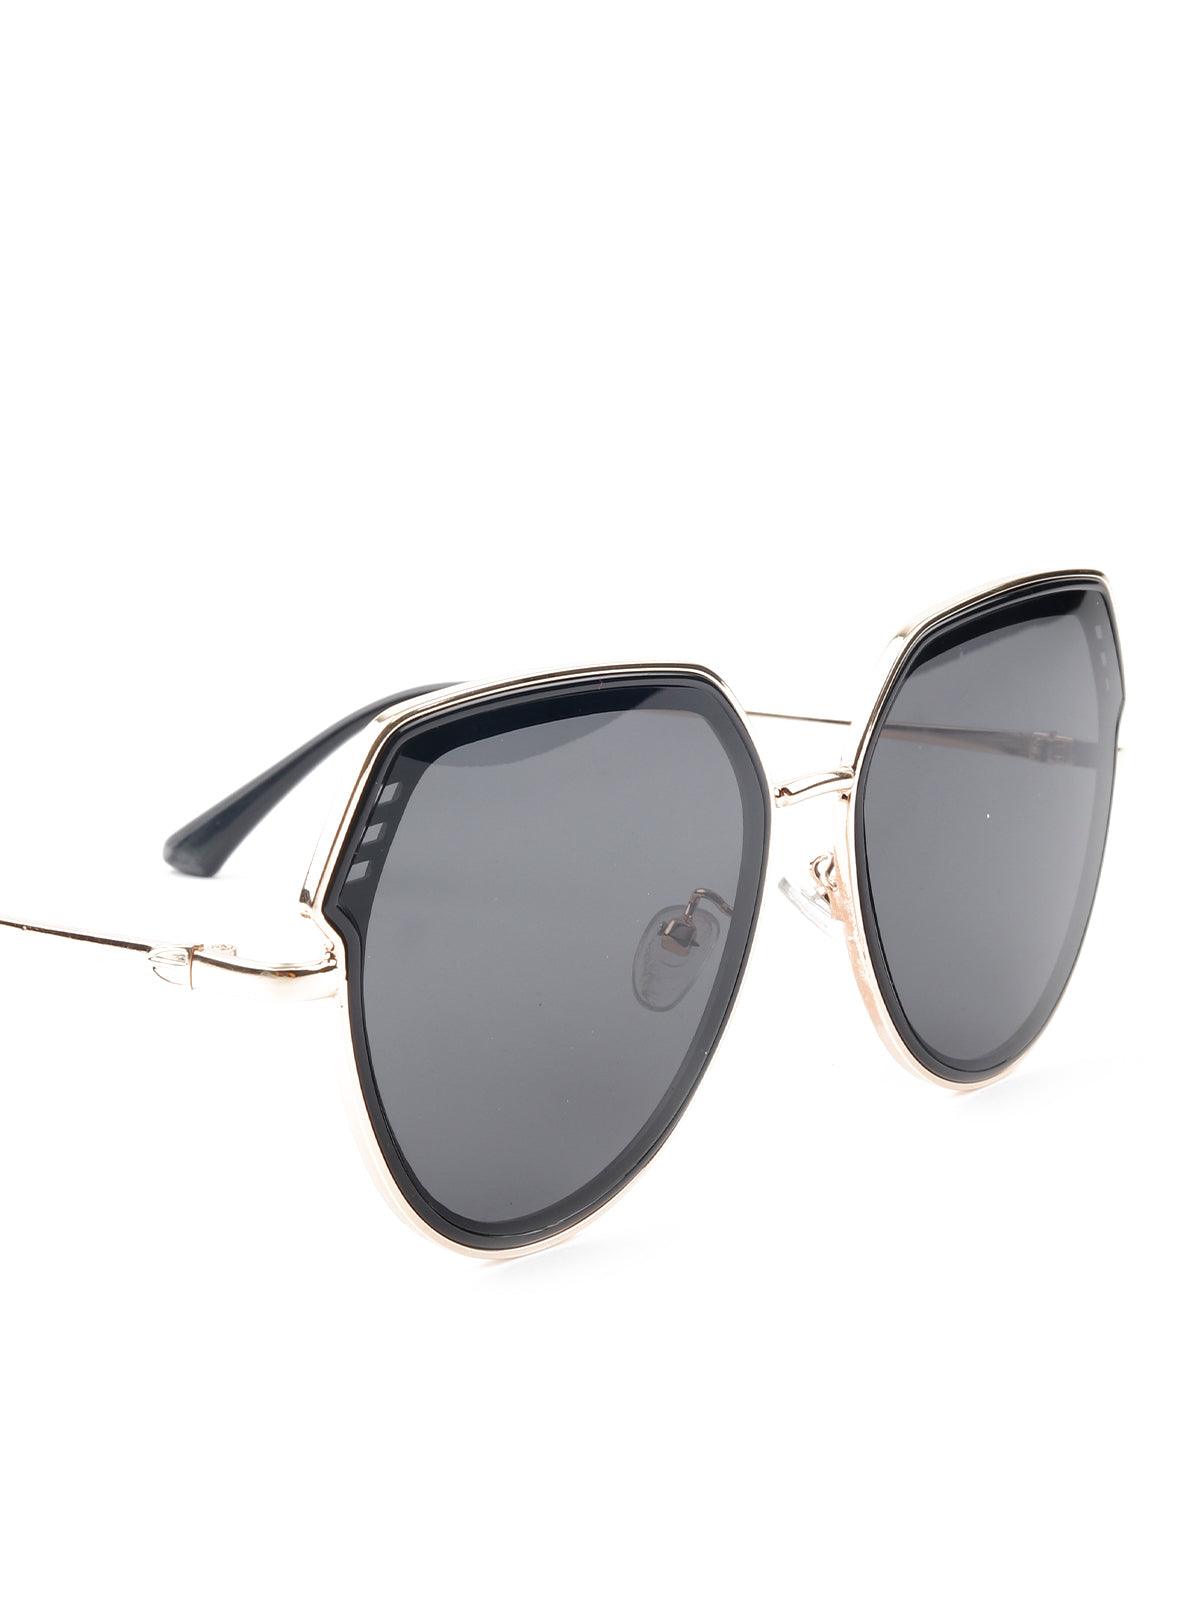 Odette Classic Black Round Tinted Sunglasses For Women